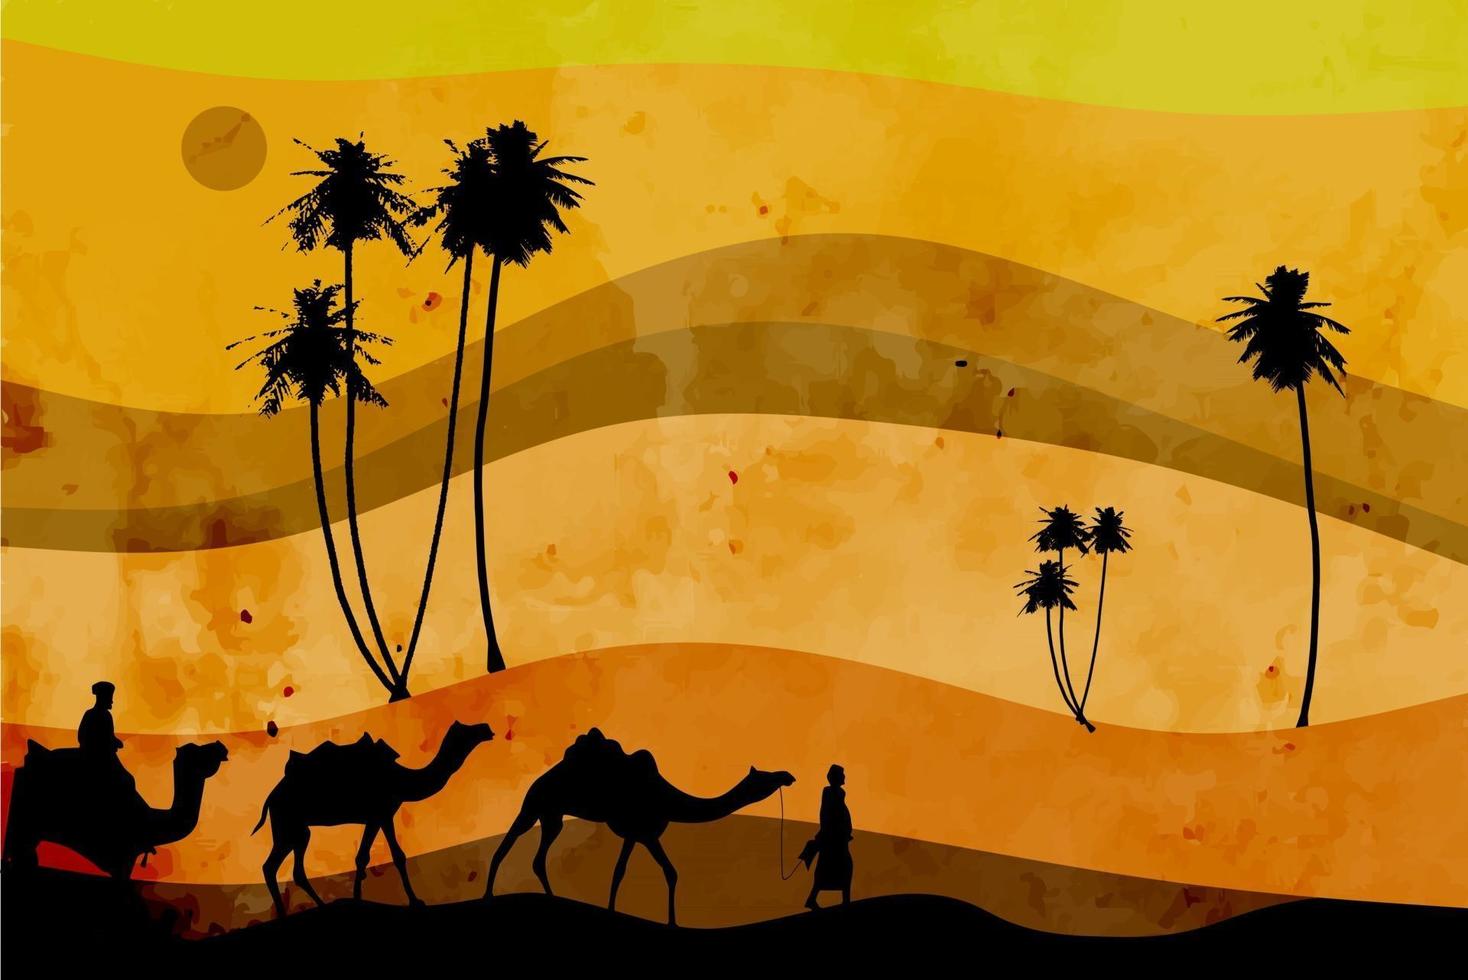 beautiful desert sunset abstract background landscape with arab passengers holding camels and abstract trees vector